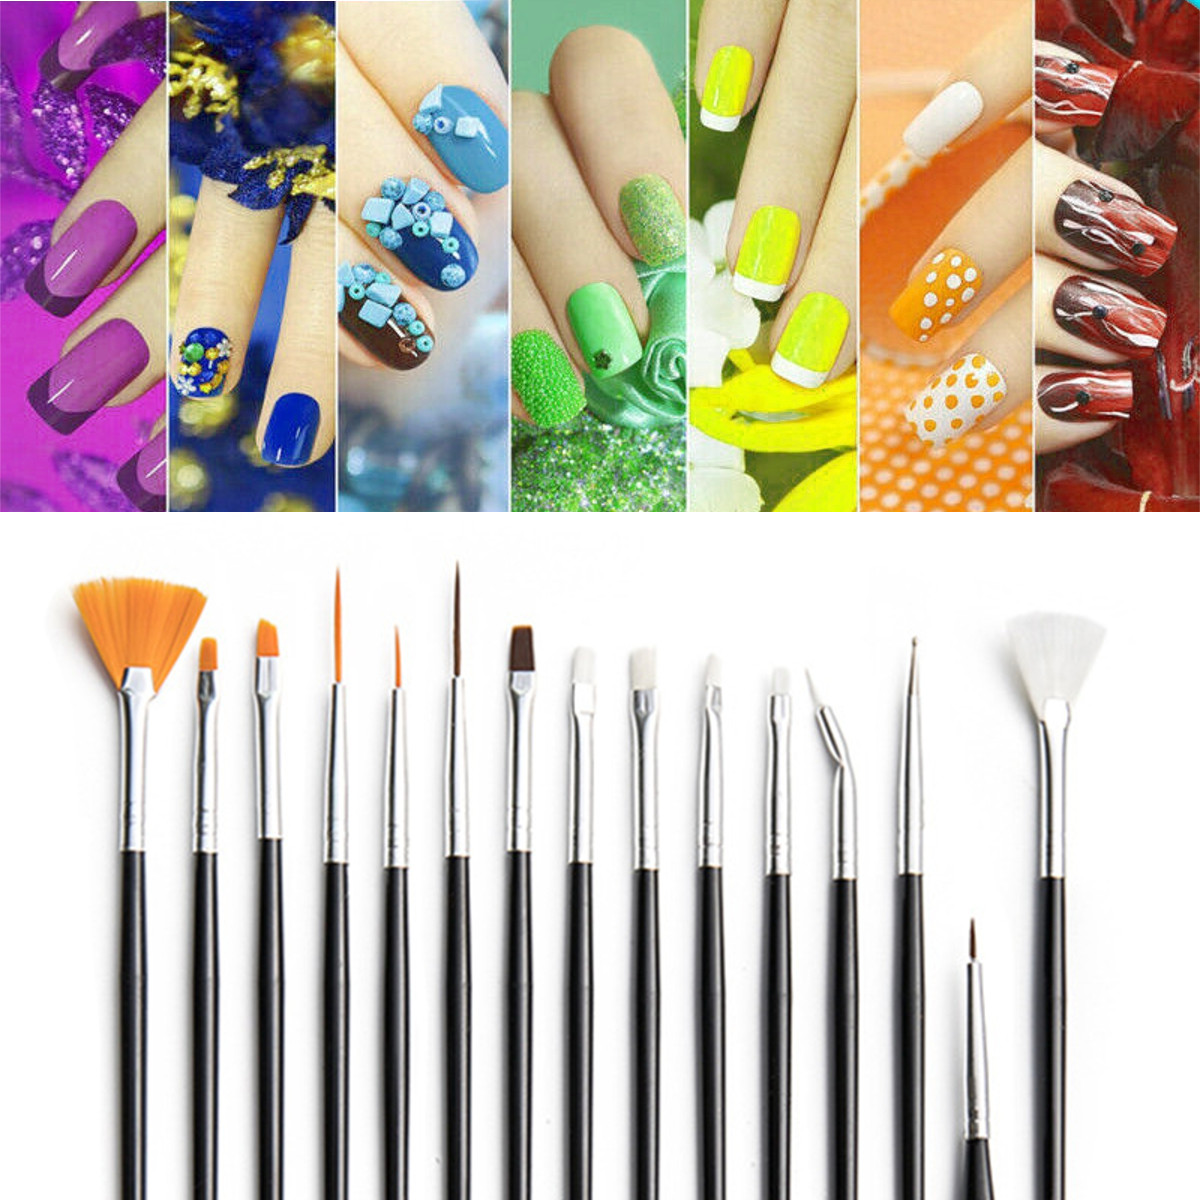 Find 58Pcs DIY Mandala Dotting Tools Set Rock Painting Kit Nail Art Craft Pen Paint Stencil Template Supplies for Sale on Gipsybee.com with cryptocurrencies